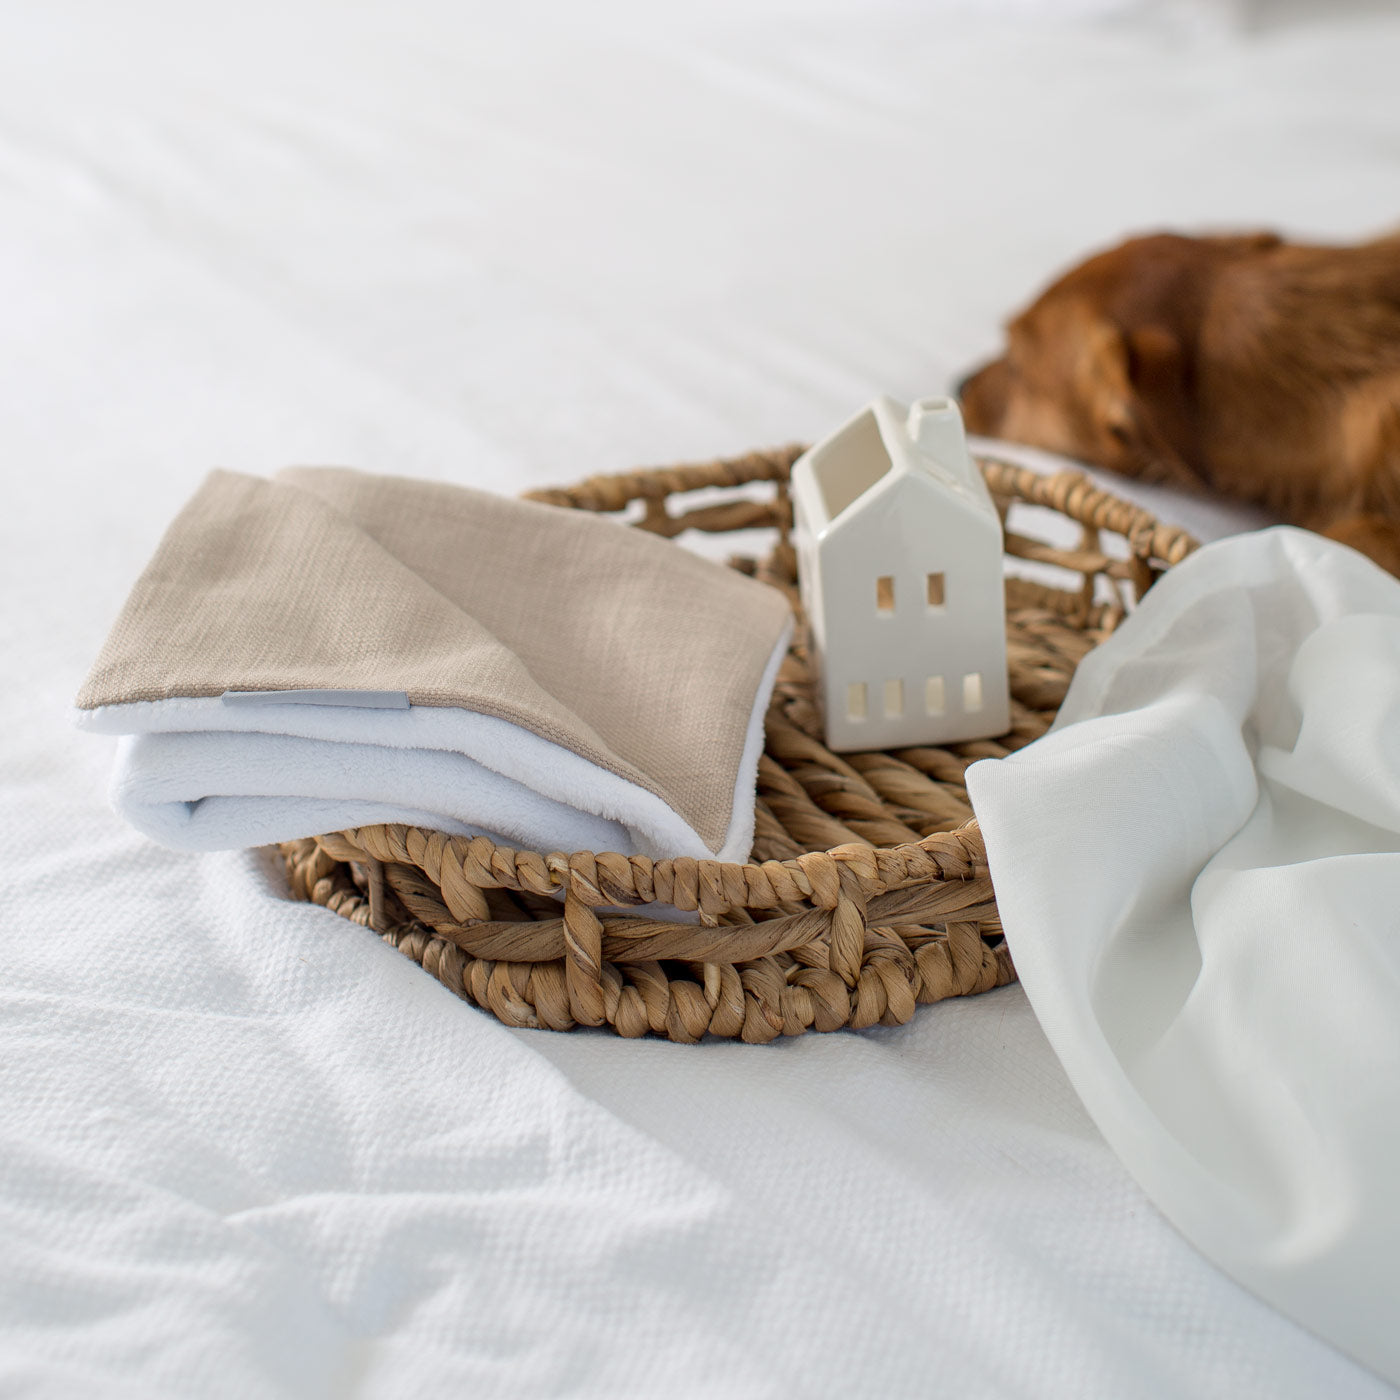 [colour:savanna oatmeal] Luxury Savanna Pet Blanket collection, In Stunning Savanna Oatmeal. The Perfect Blanket For Dogs, Available at Lords & Labradors